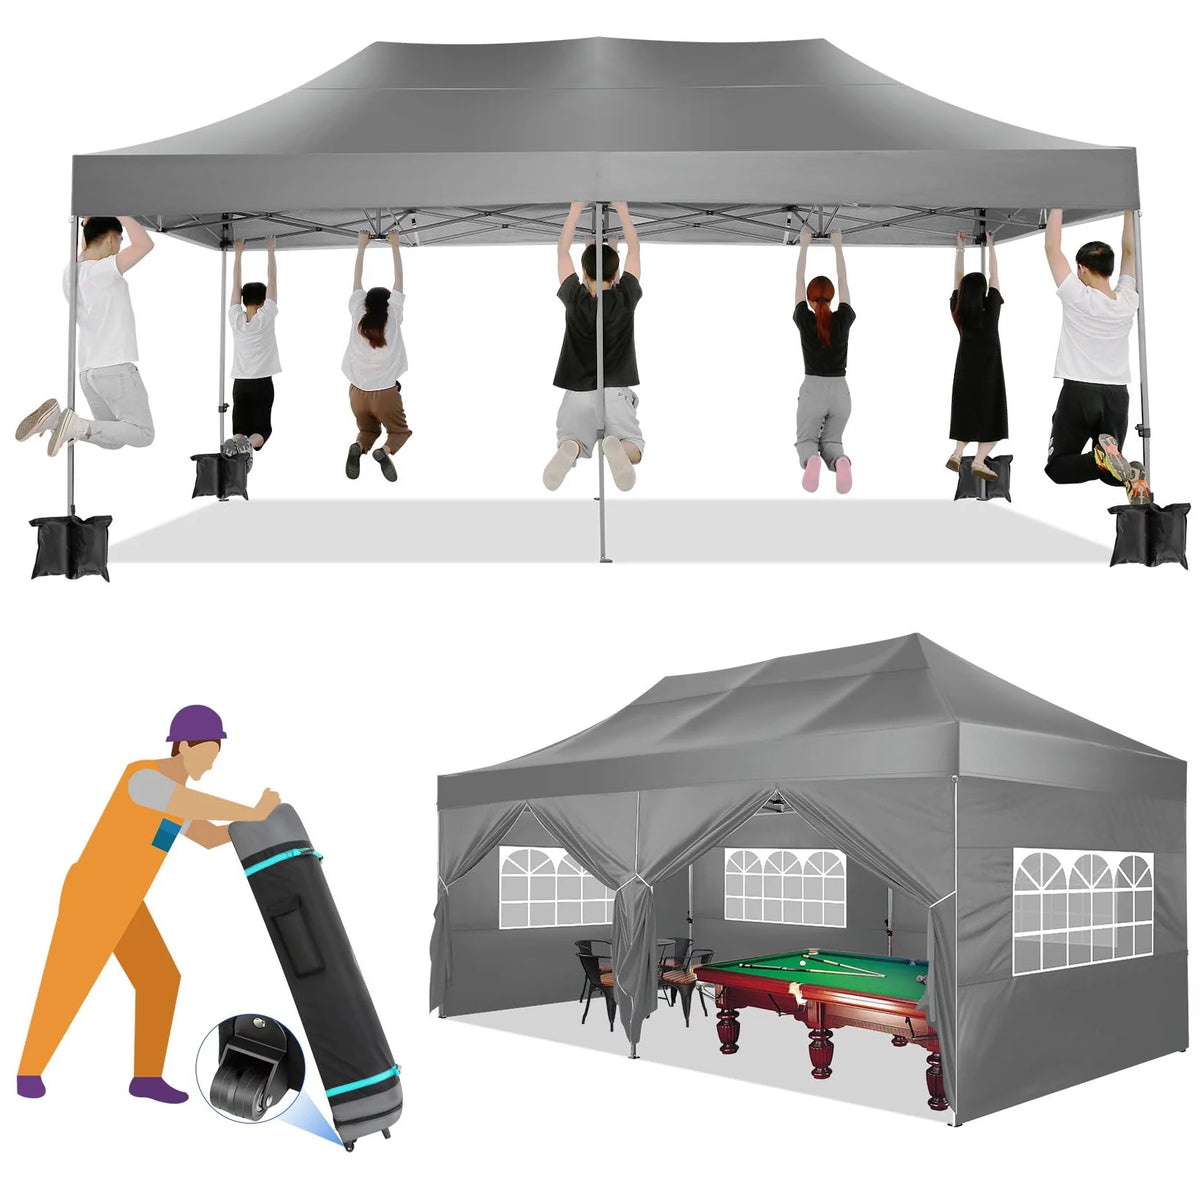 YUEBO Pop Up Canopy 10x20 pop up Canopy Tent Folding Protable Ez up Canopies Party Tent Sun Shade Wedding Instant Better Air Circulation Outdoor Gazebos with Backpack Bag - Gray Grey